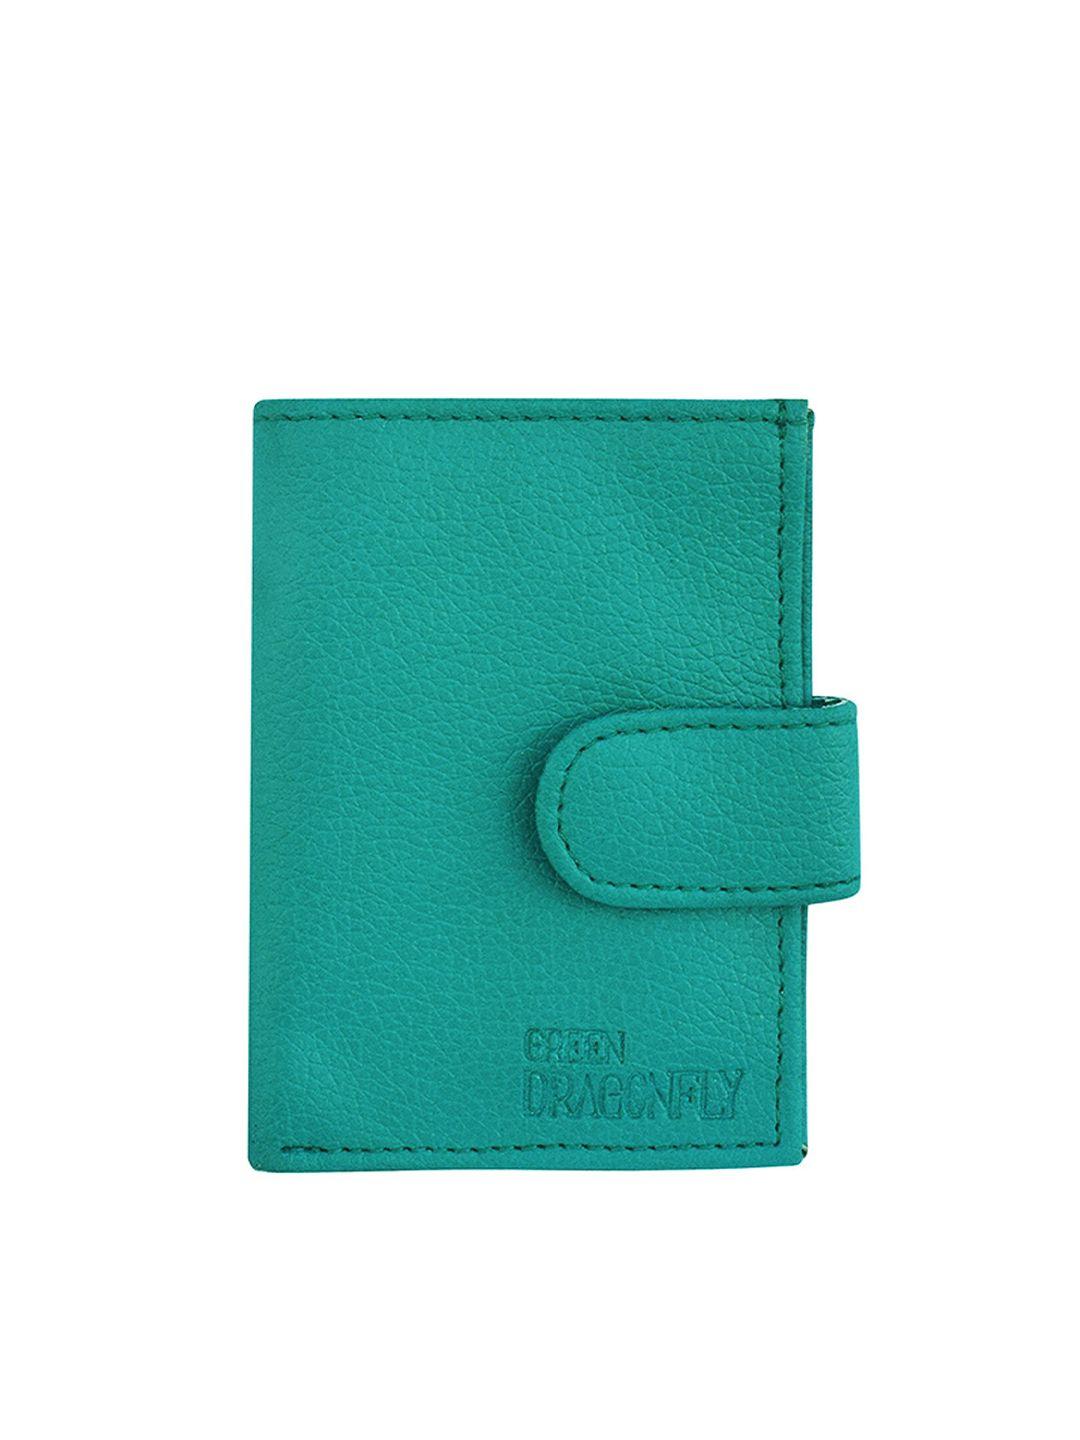 green dragonfly unisex teal pu card holder